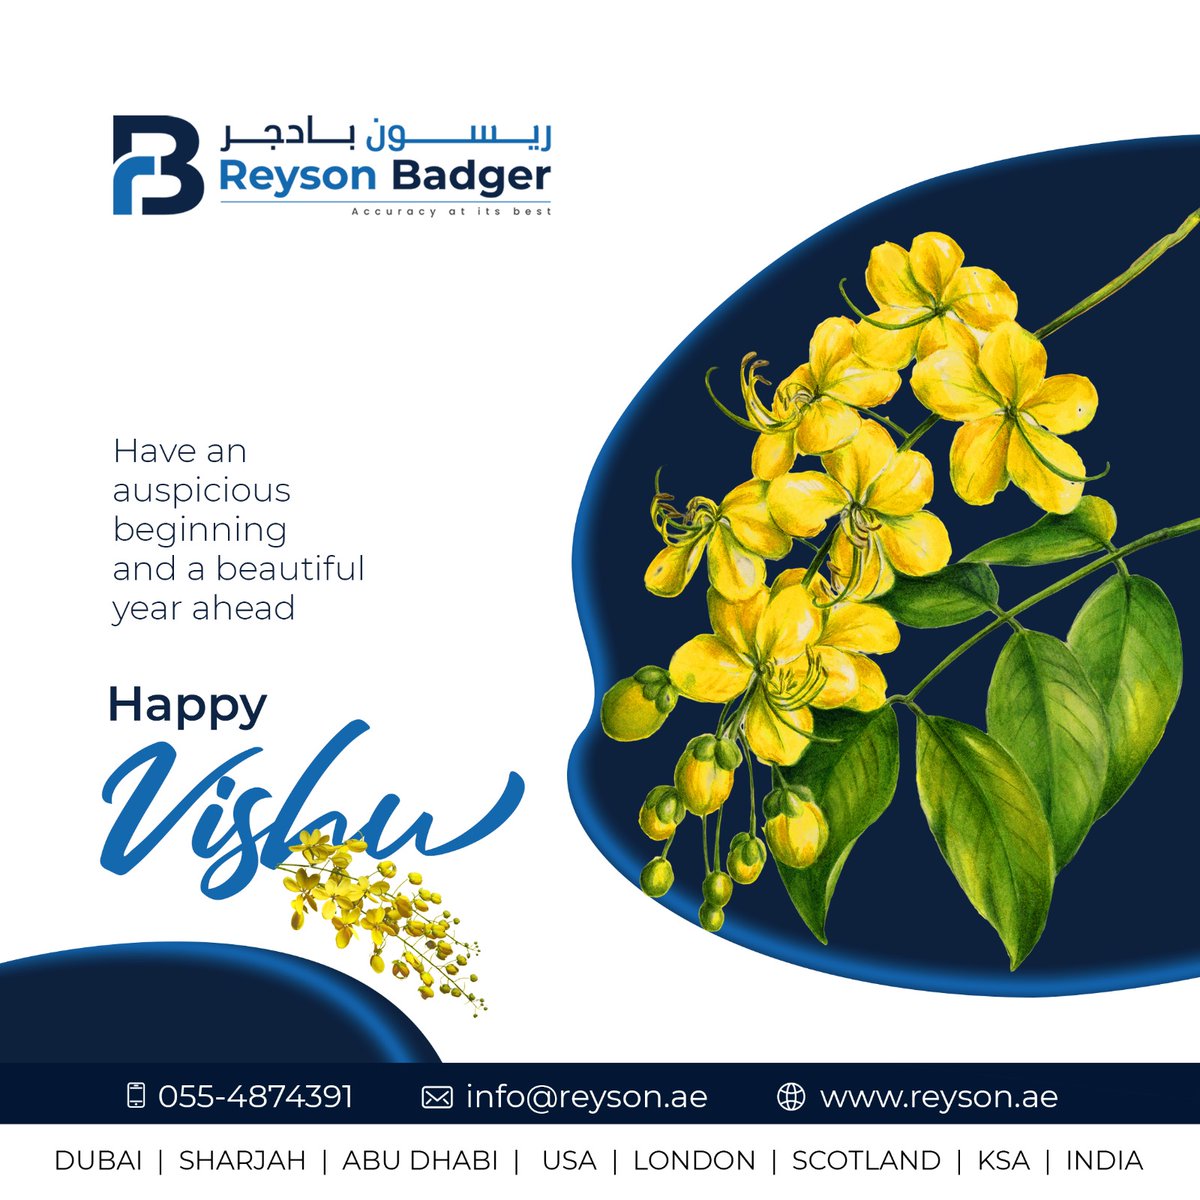 Here's hoping that this auspicious day brings along with it a new ray of hope. May there be peace and goodness all around. Happy Vishu.

#ReysonBadger #Vat #uaetax #TaxConsultants #accounting #auditingservices #Peace #goodness #newbeginnings #HappyVishu #vishu2023